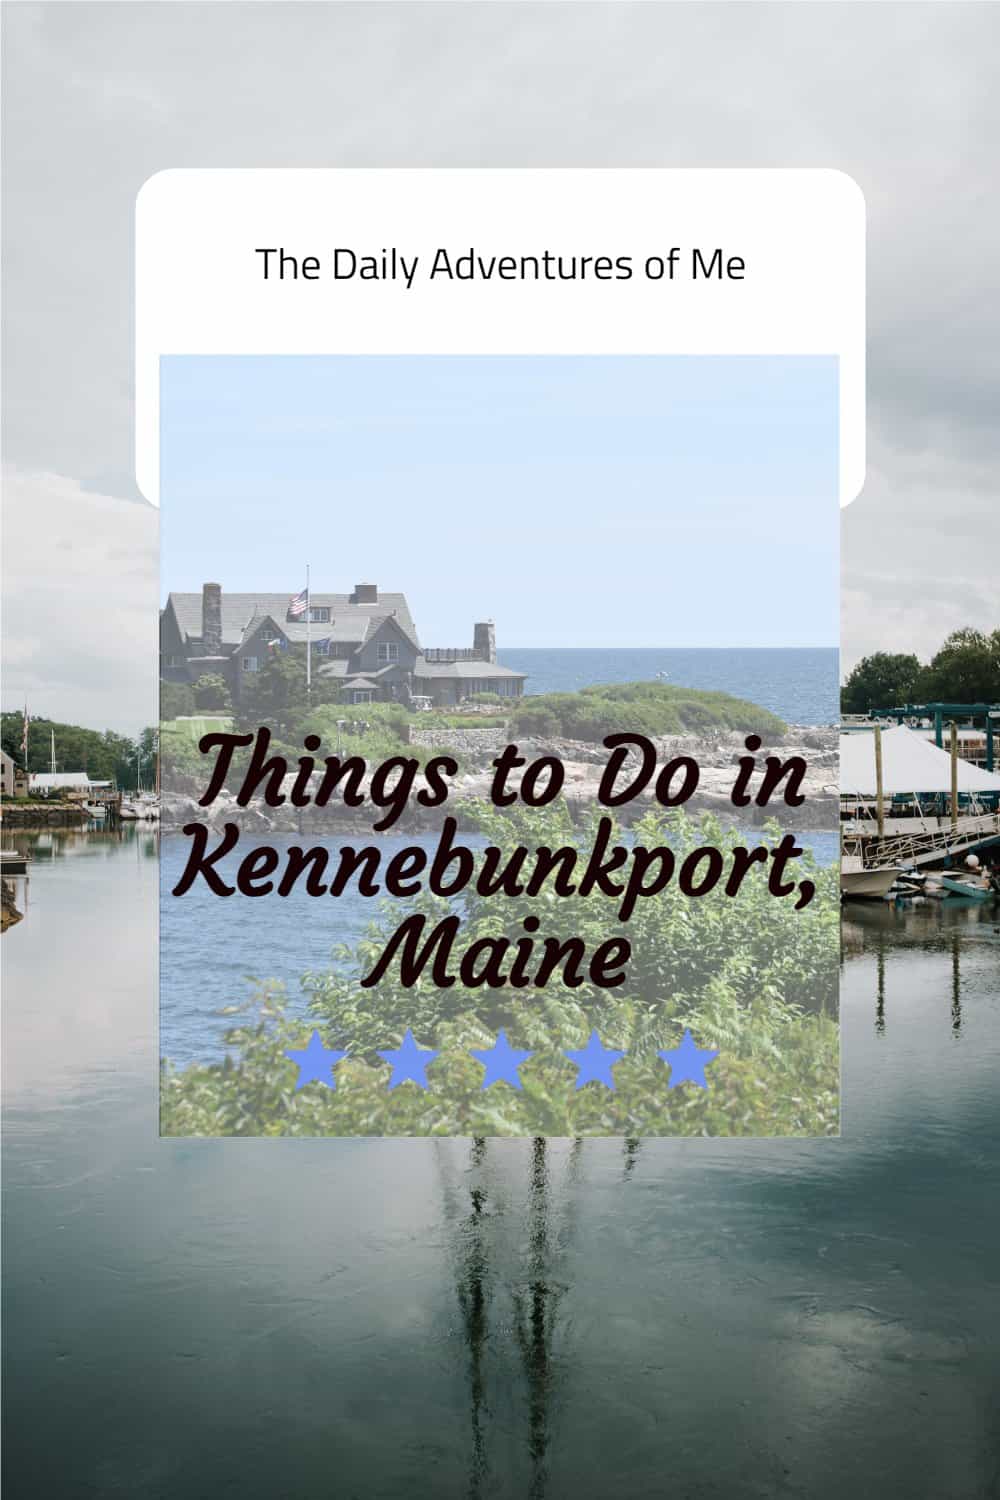 Lighthouses, beaches, villages on the water- Read on for things to do in Kennebunkport, Maine. #USTravel #Mainetravel #visitMaine